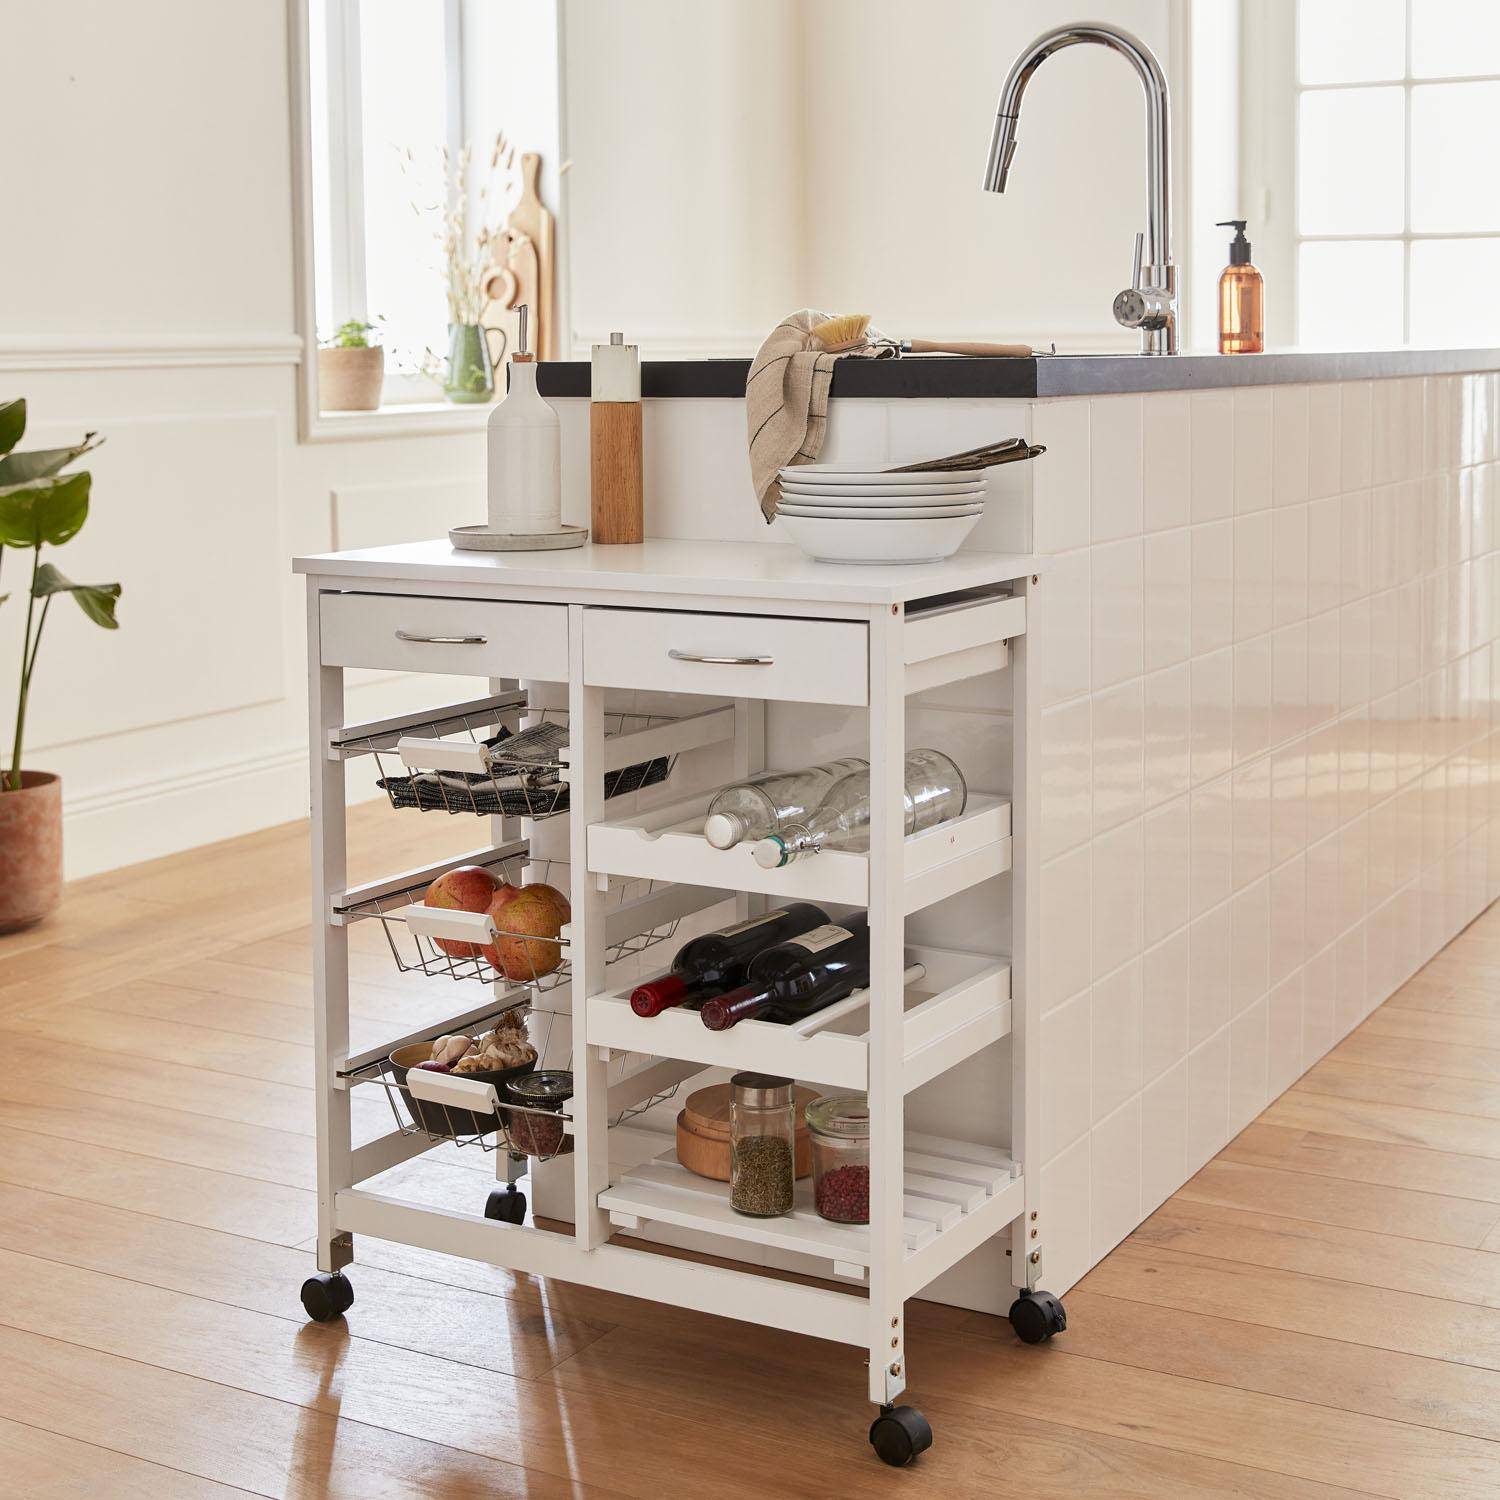 Wood-Effect Kitchen Cart with Wheels - 65x35 cm, white Photo1